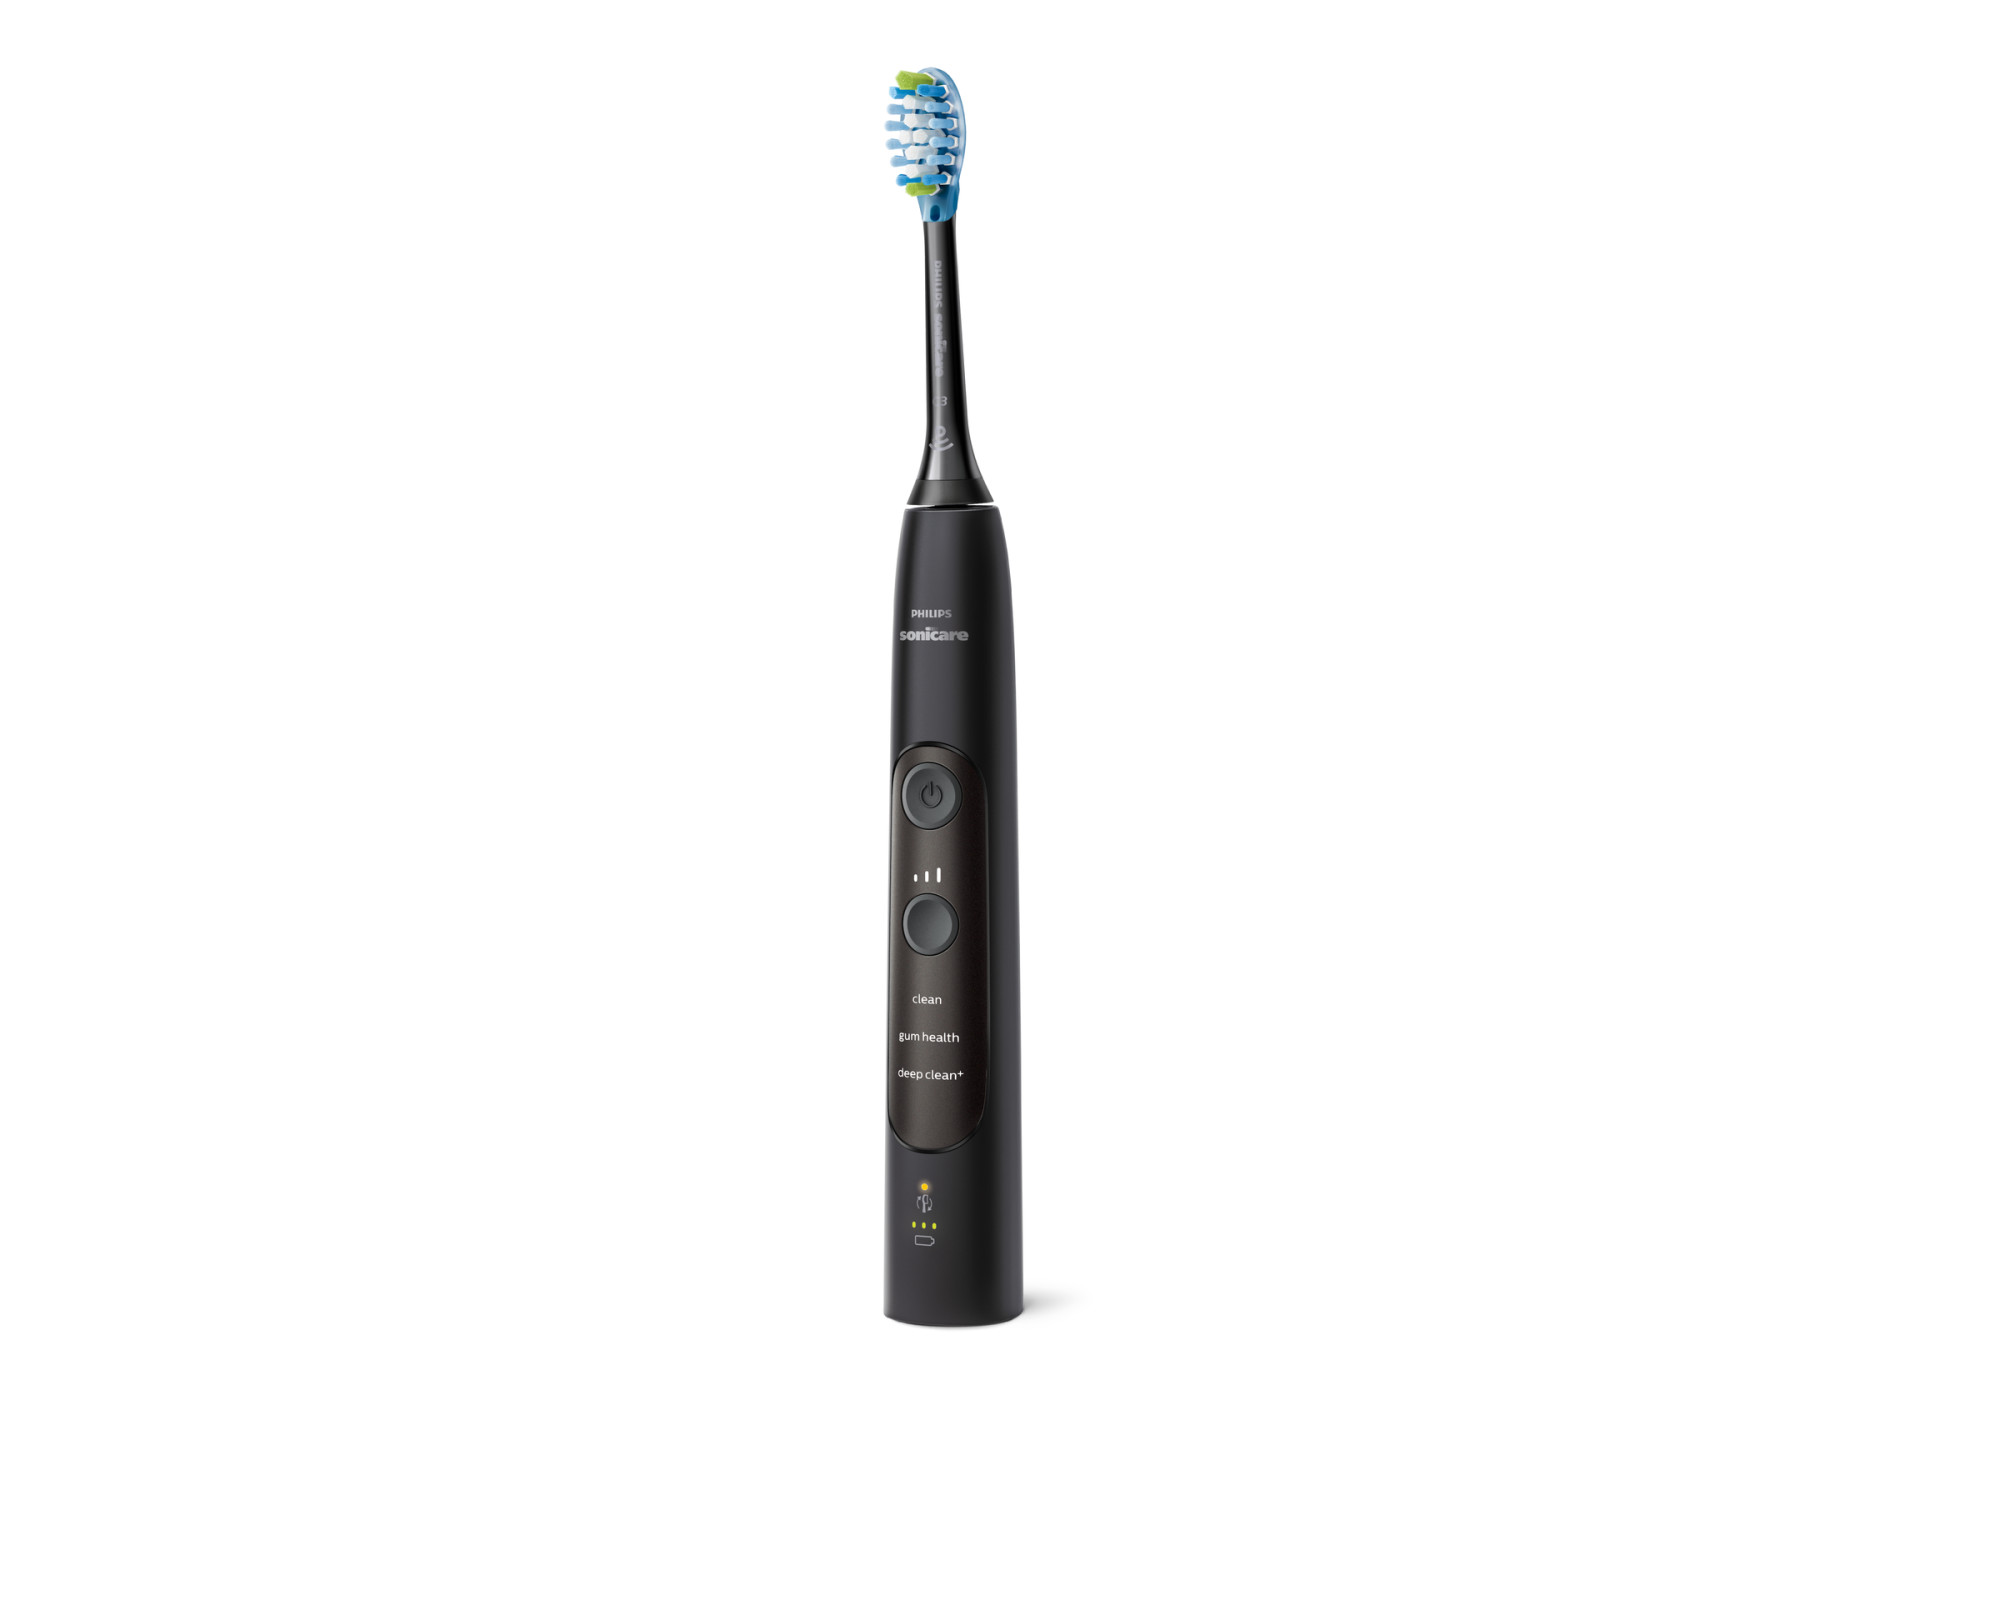 Philips Sonicare ExpertClean 7300, Rechargeable Electric Toothbrush, Black HX9610/17 - image 9 of 19